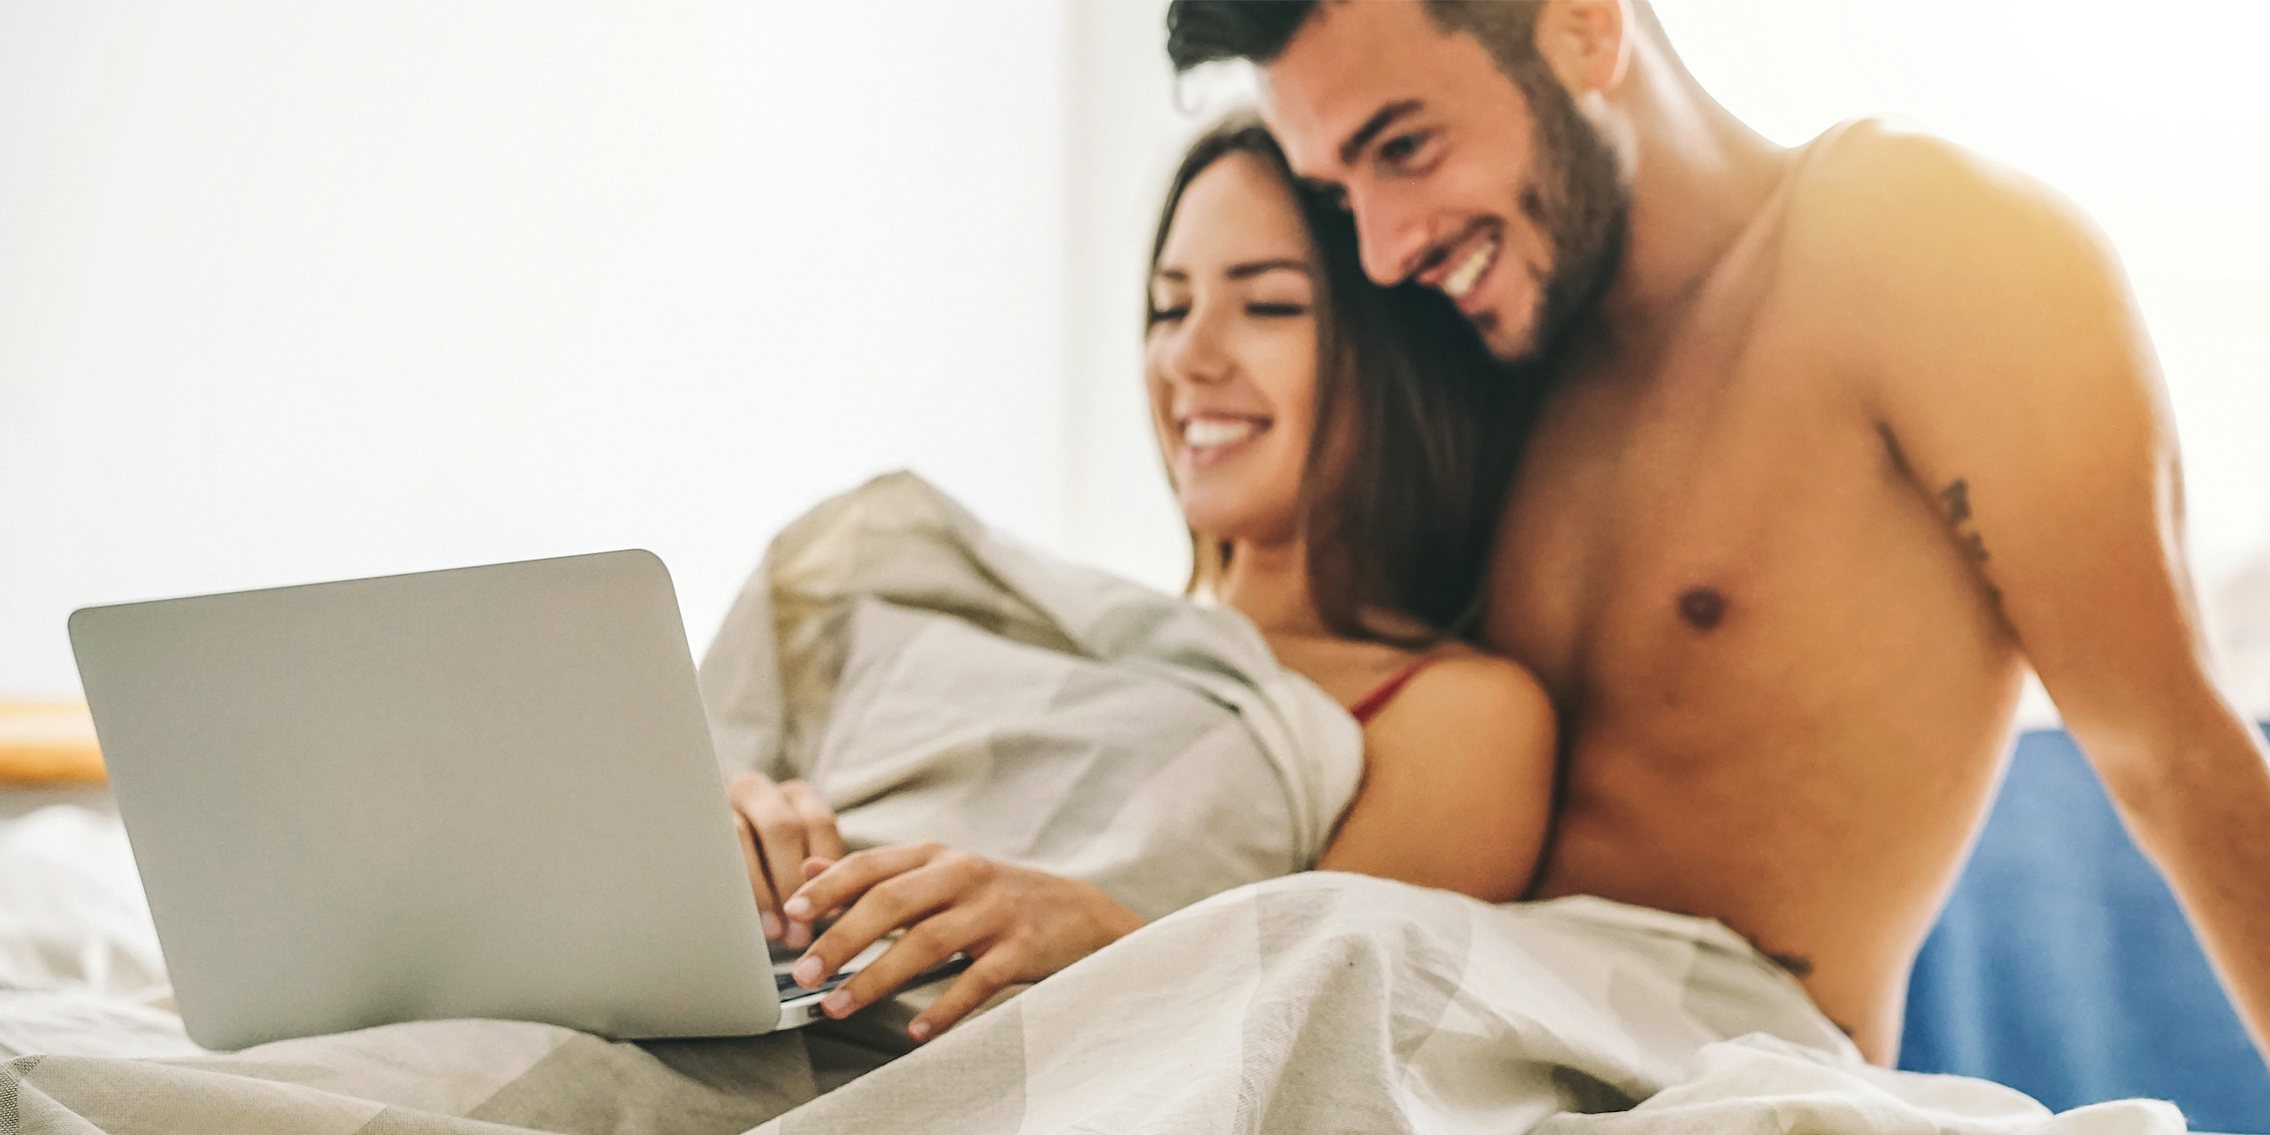 Couple Enjoy - Porn For Couples: The Best Couple Porn to Watch and Explore Together